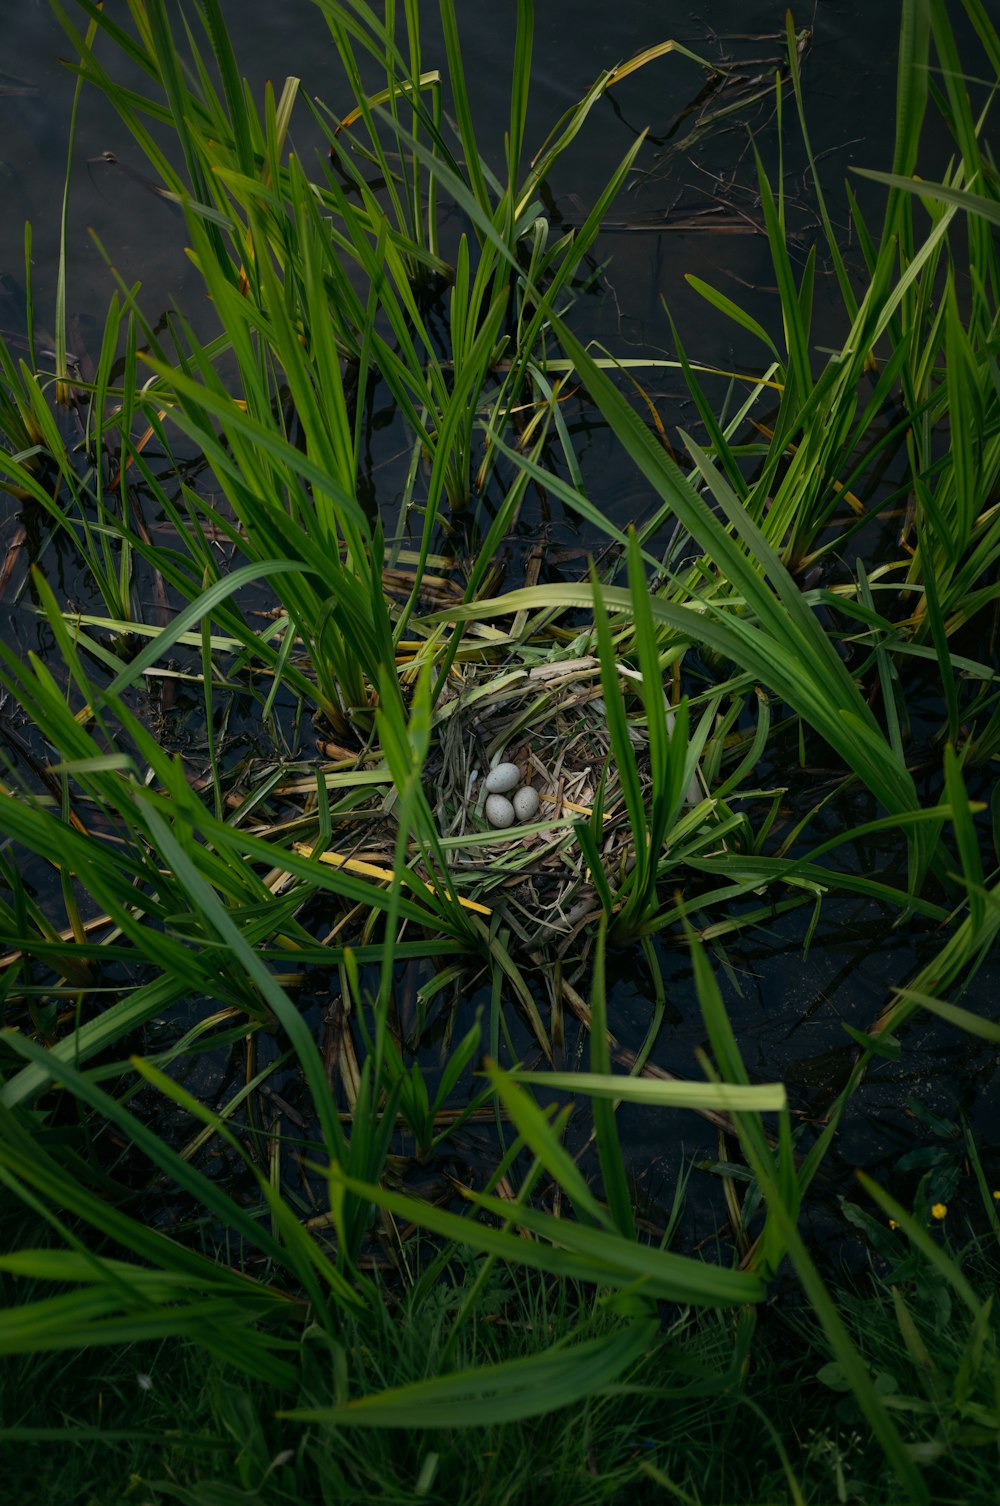 a bird's nest in the grass next to a body of water